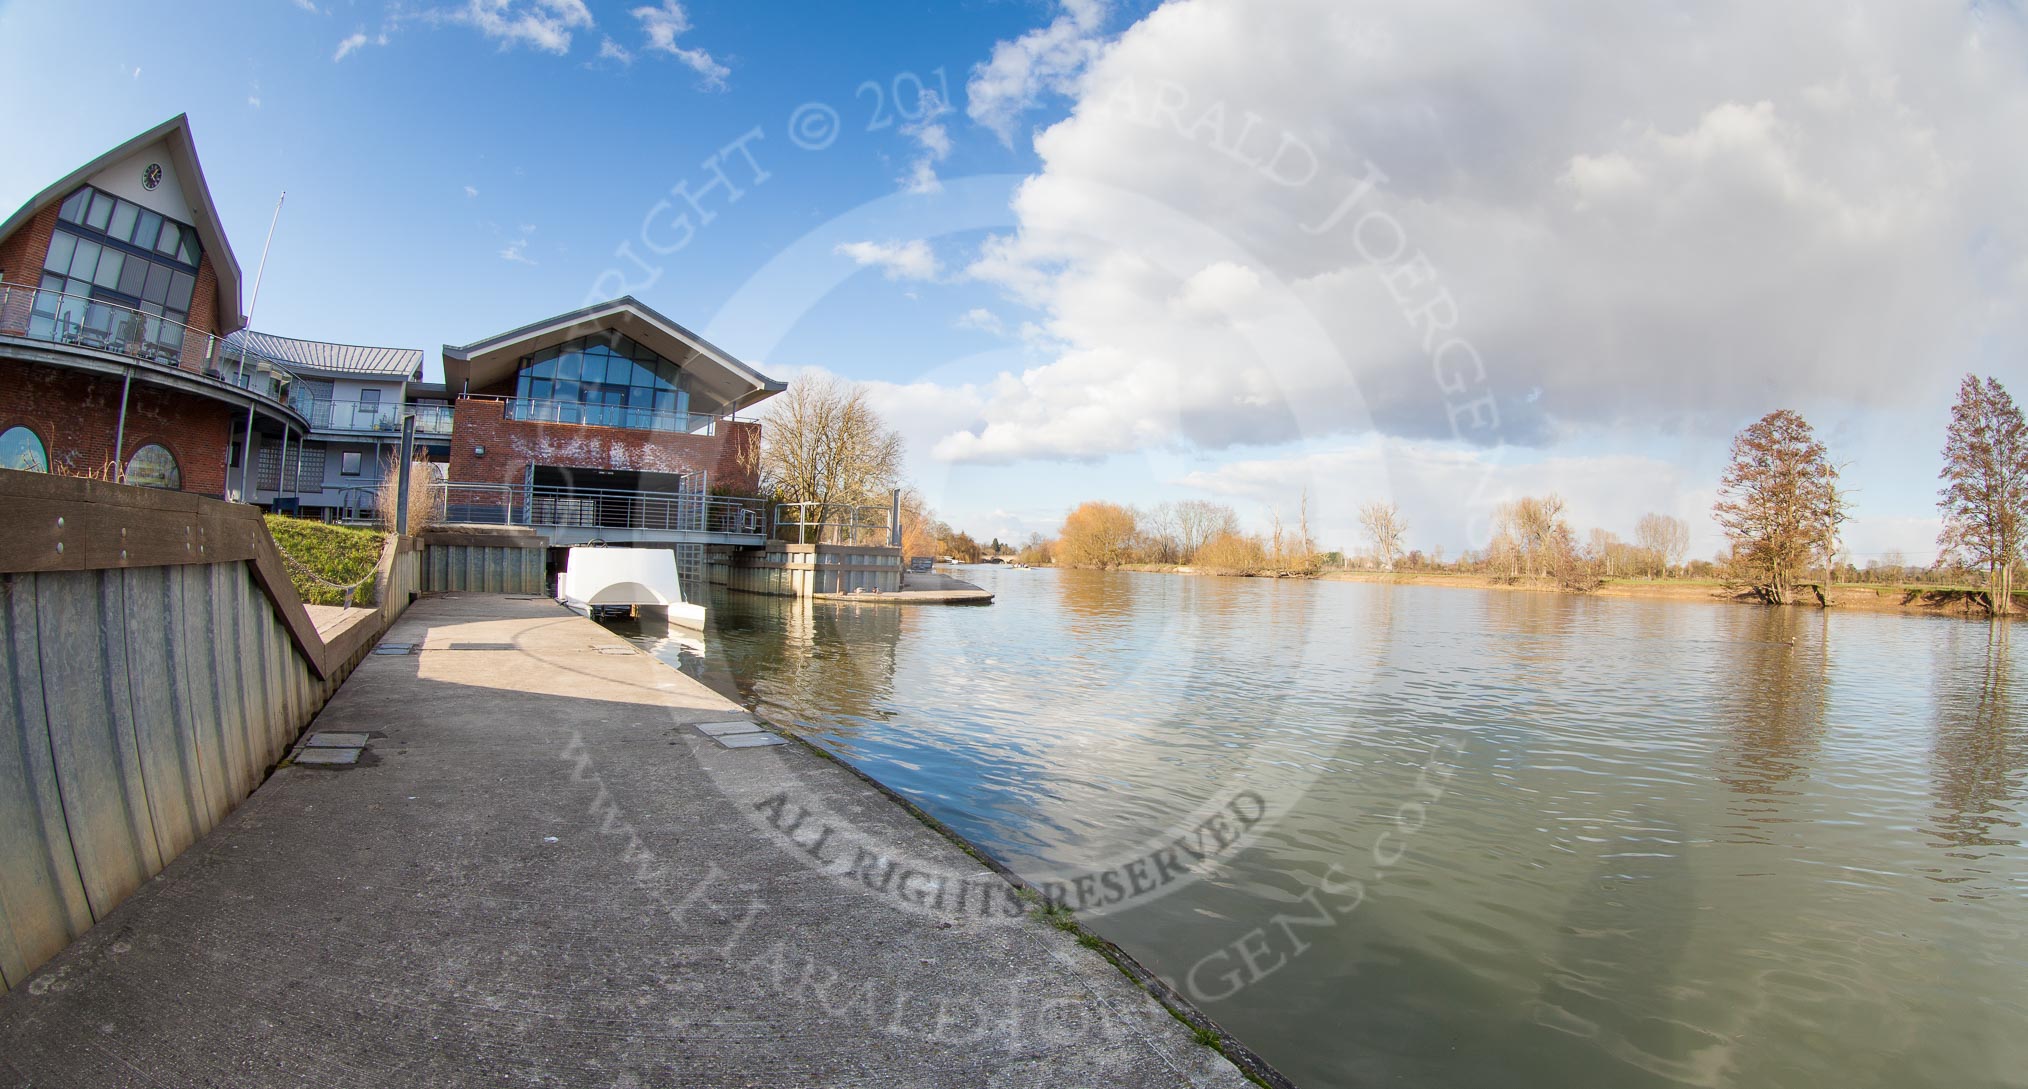 The Boat Race season 2013 - OUWBC training: Fleming Boathouse, the Oxford University Boat Club's training facility at the River Thames in Wallingford..
Fleming Boathouse,
Wallingford,
Oxfordshire,
United Kingdom,
on 13 March 2013 at 16:04, image #4